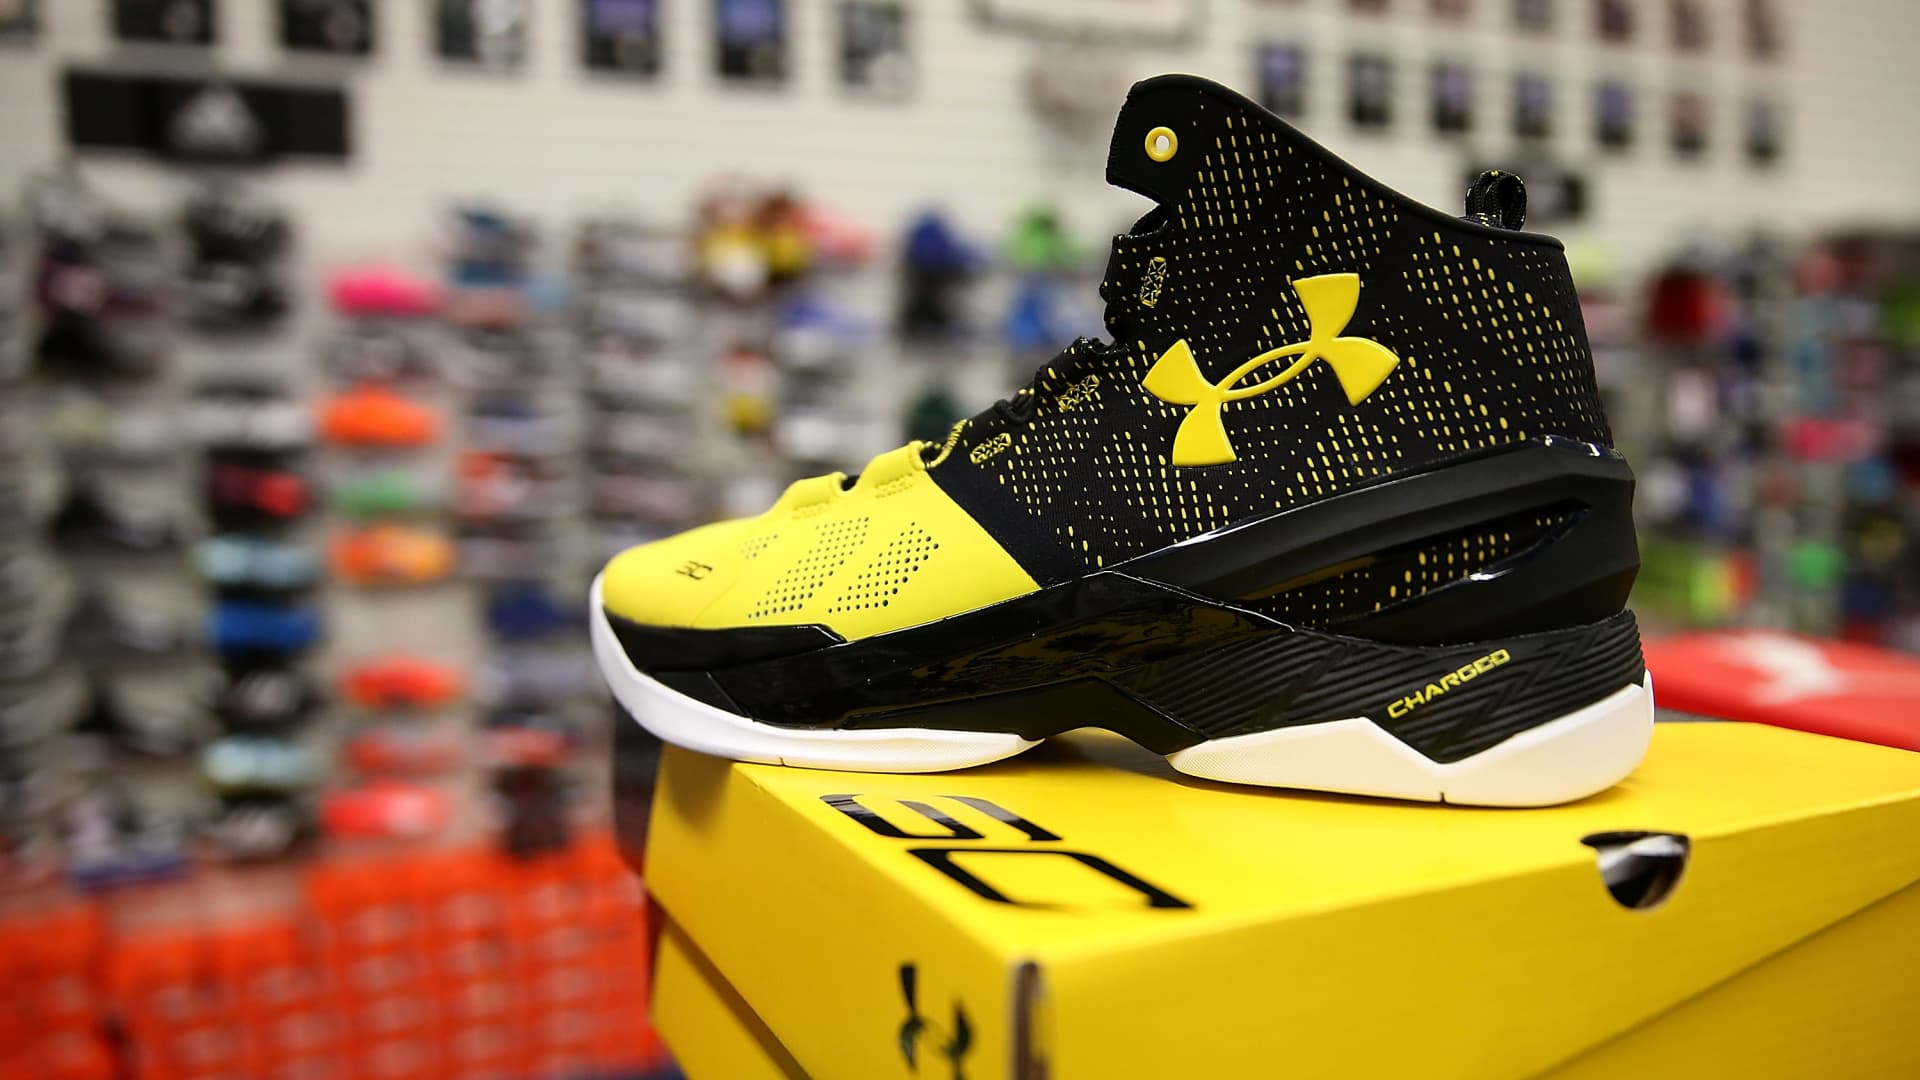 Under Armour pursues plans to break ties with some retailers